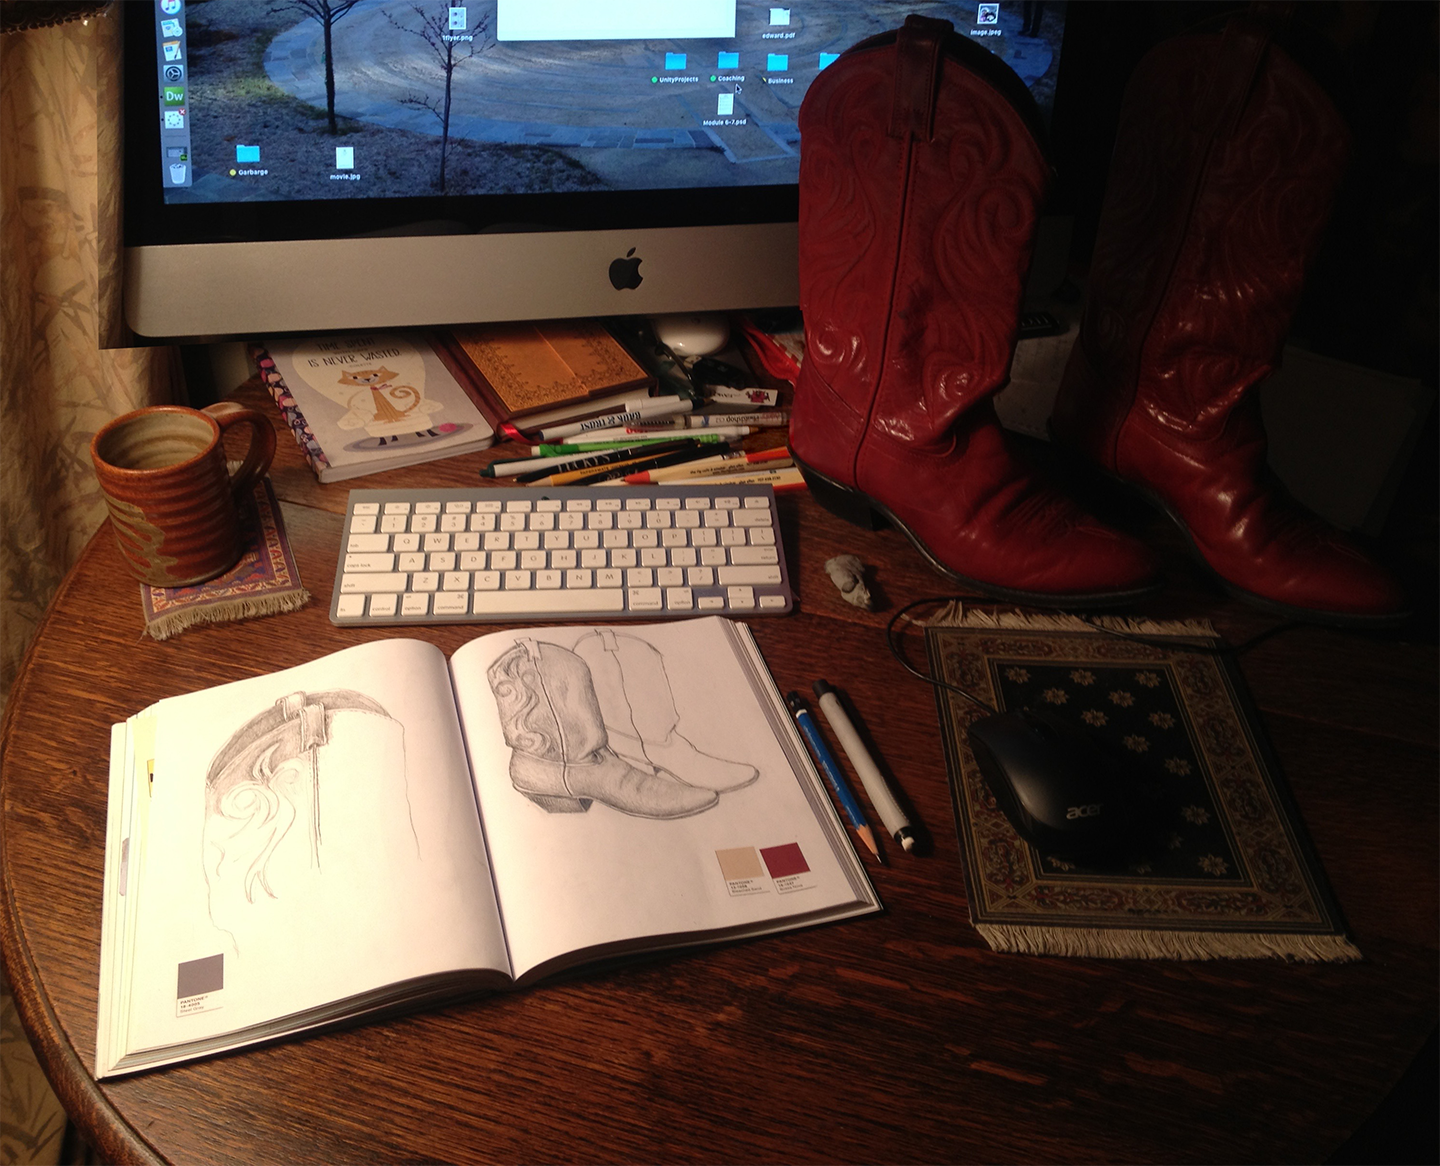 An evening at home with my red cowboy boots.